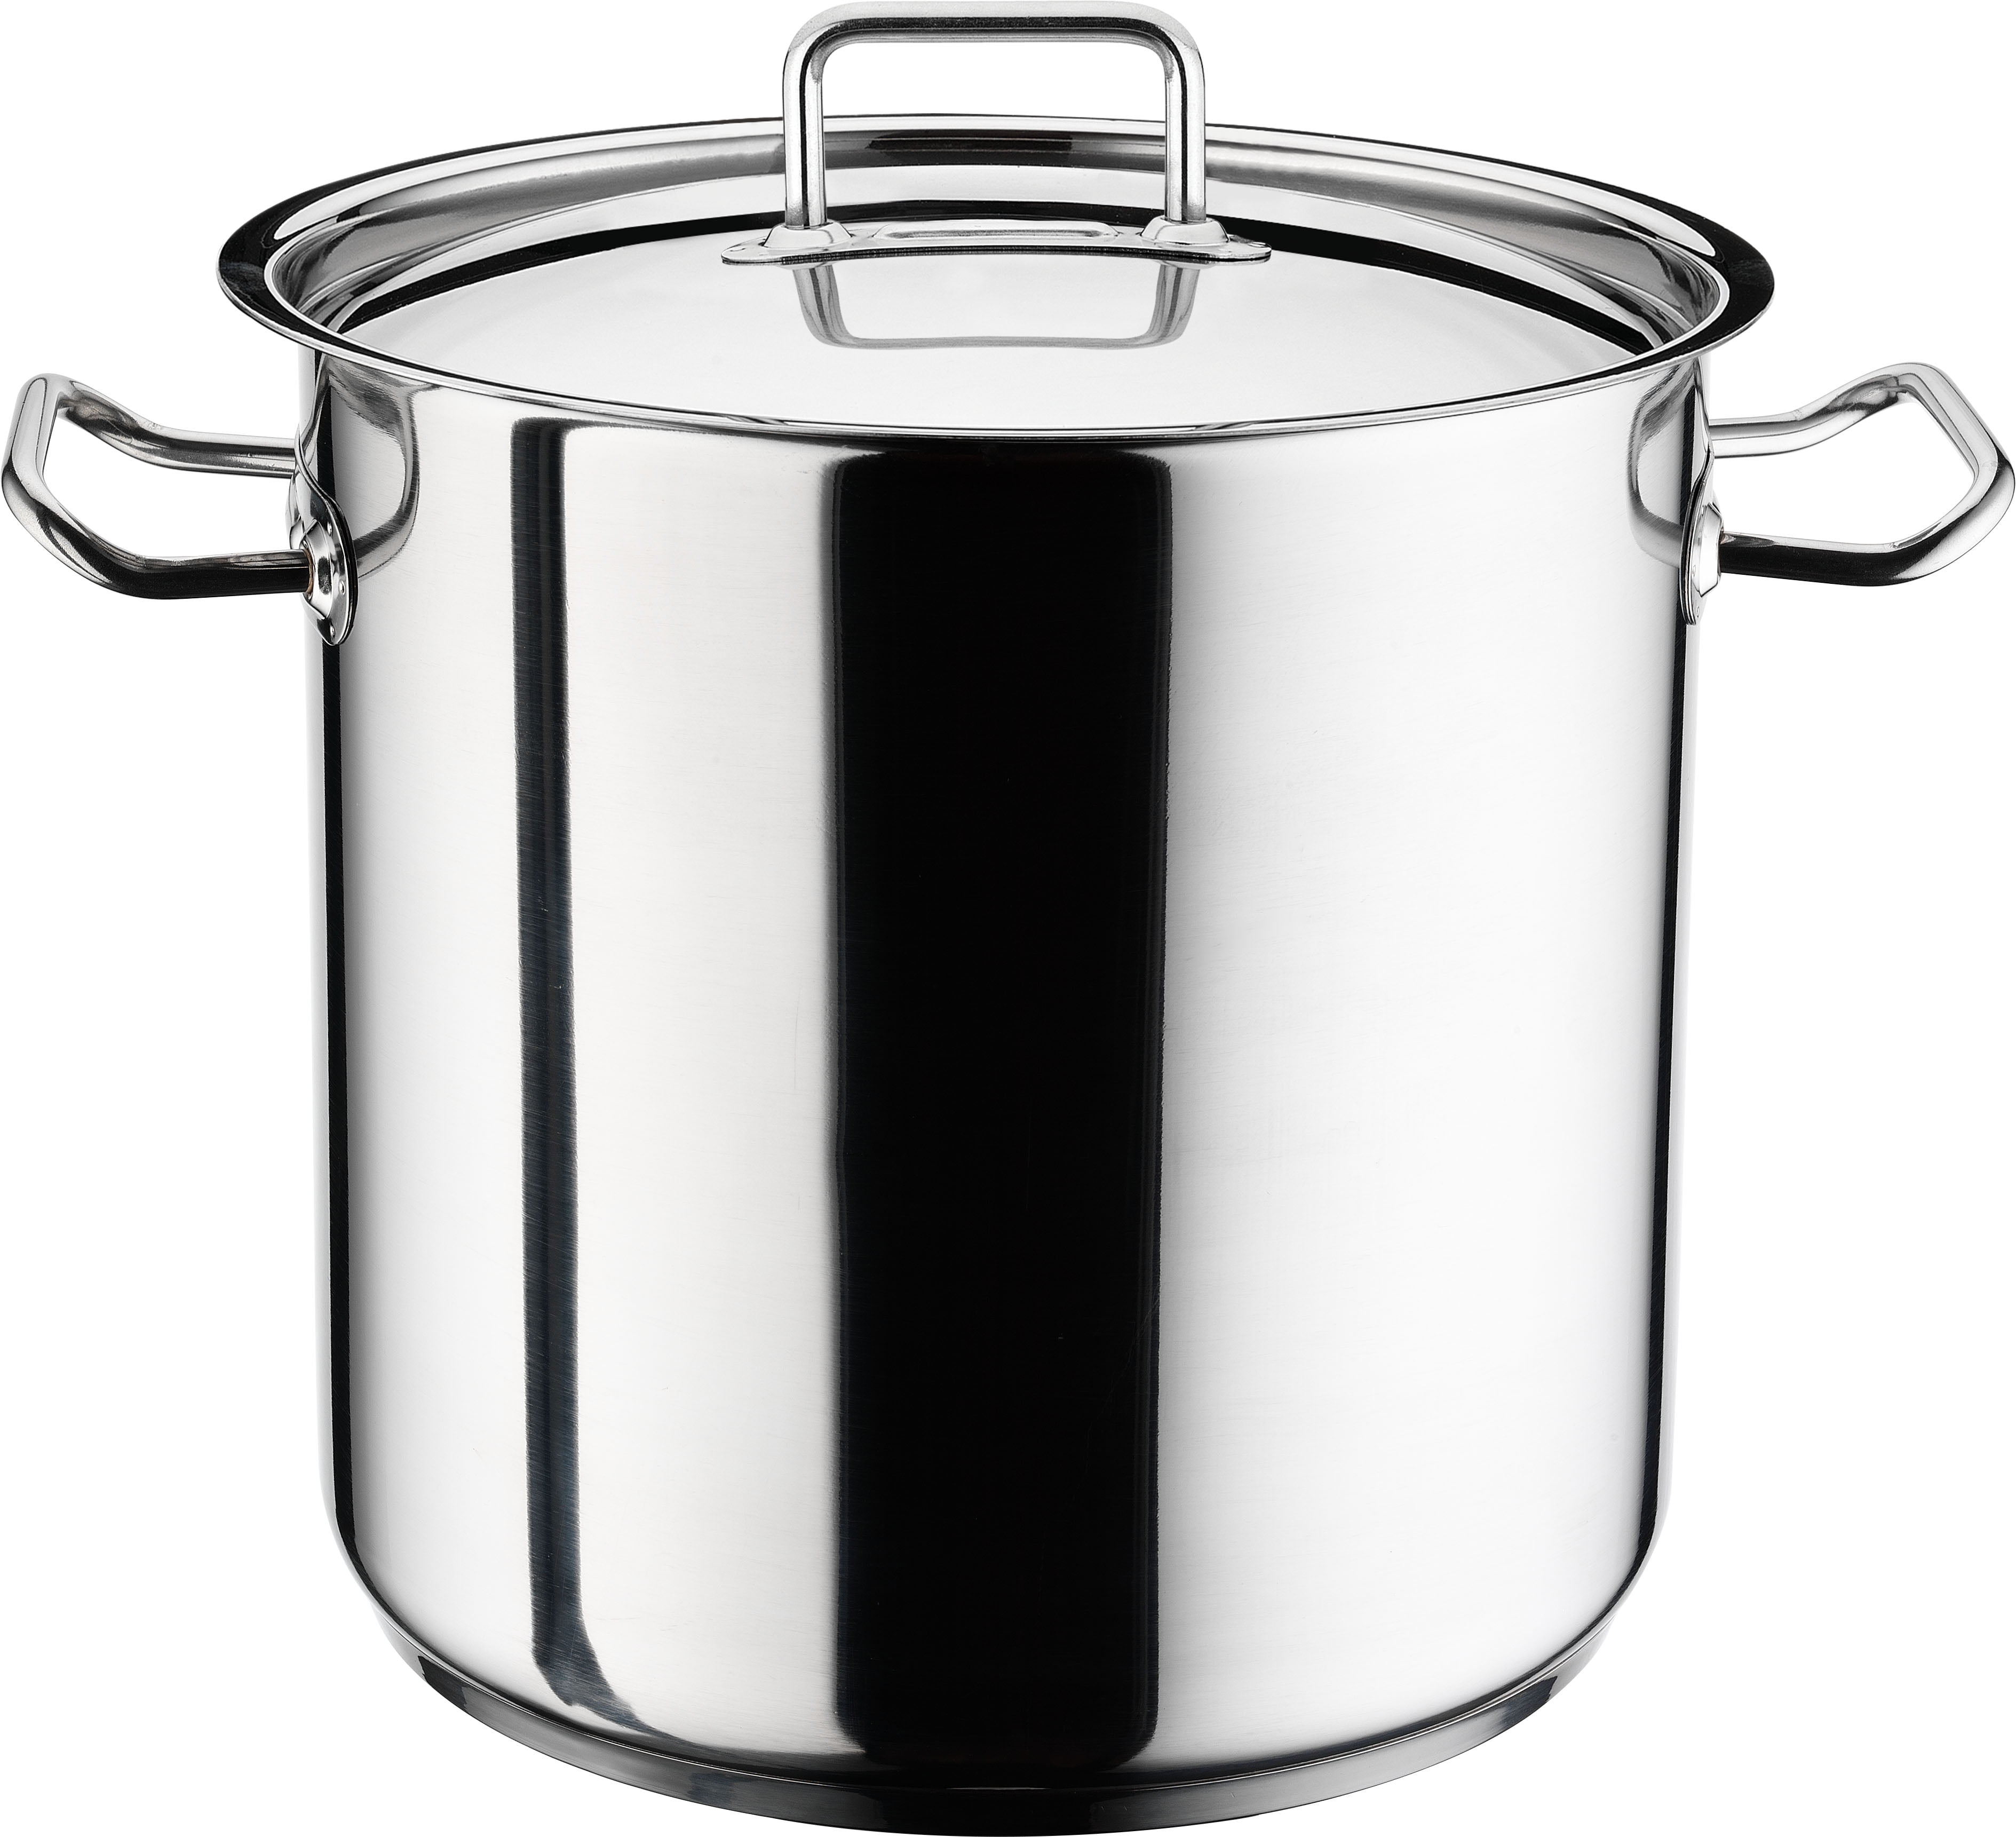 Cooks Standard 18/10 Stainless Steel Stockpot 16-Quart, Classic Deep  Cooking Pot Canning Cookware with Stainless Steel Lid, Silver